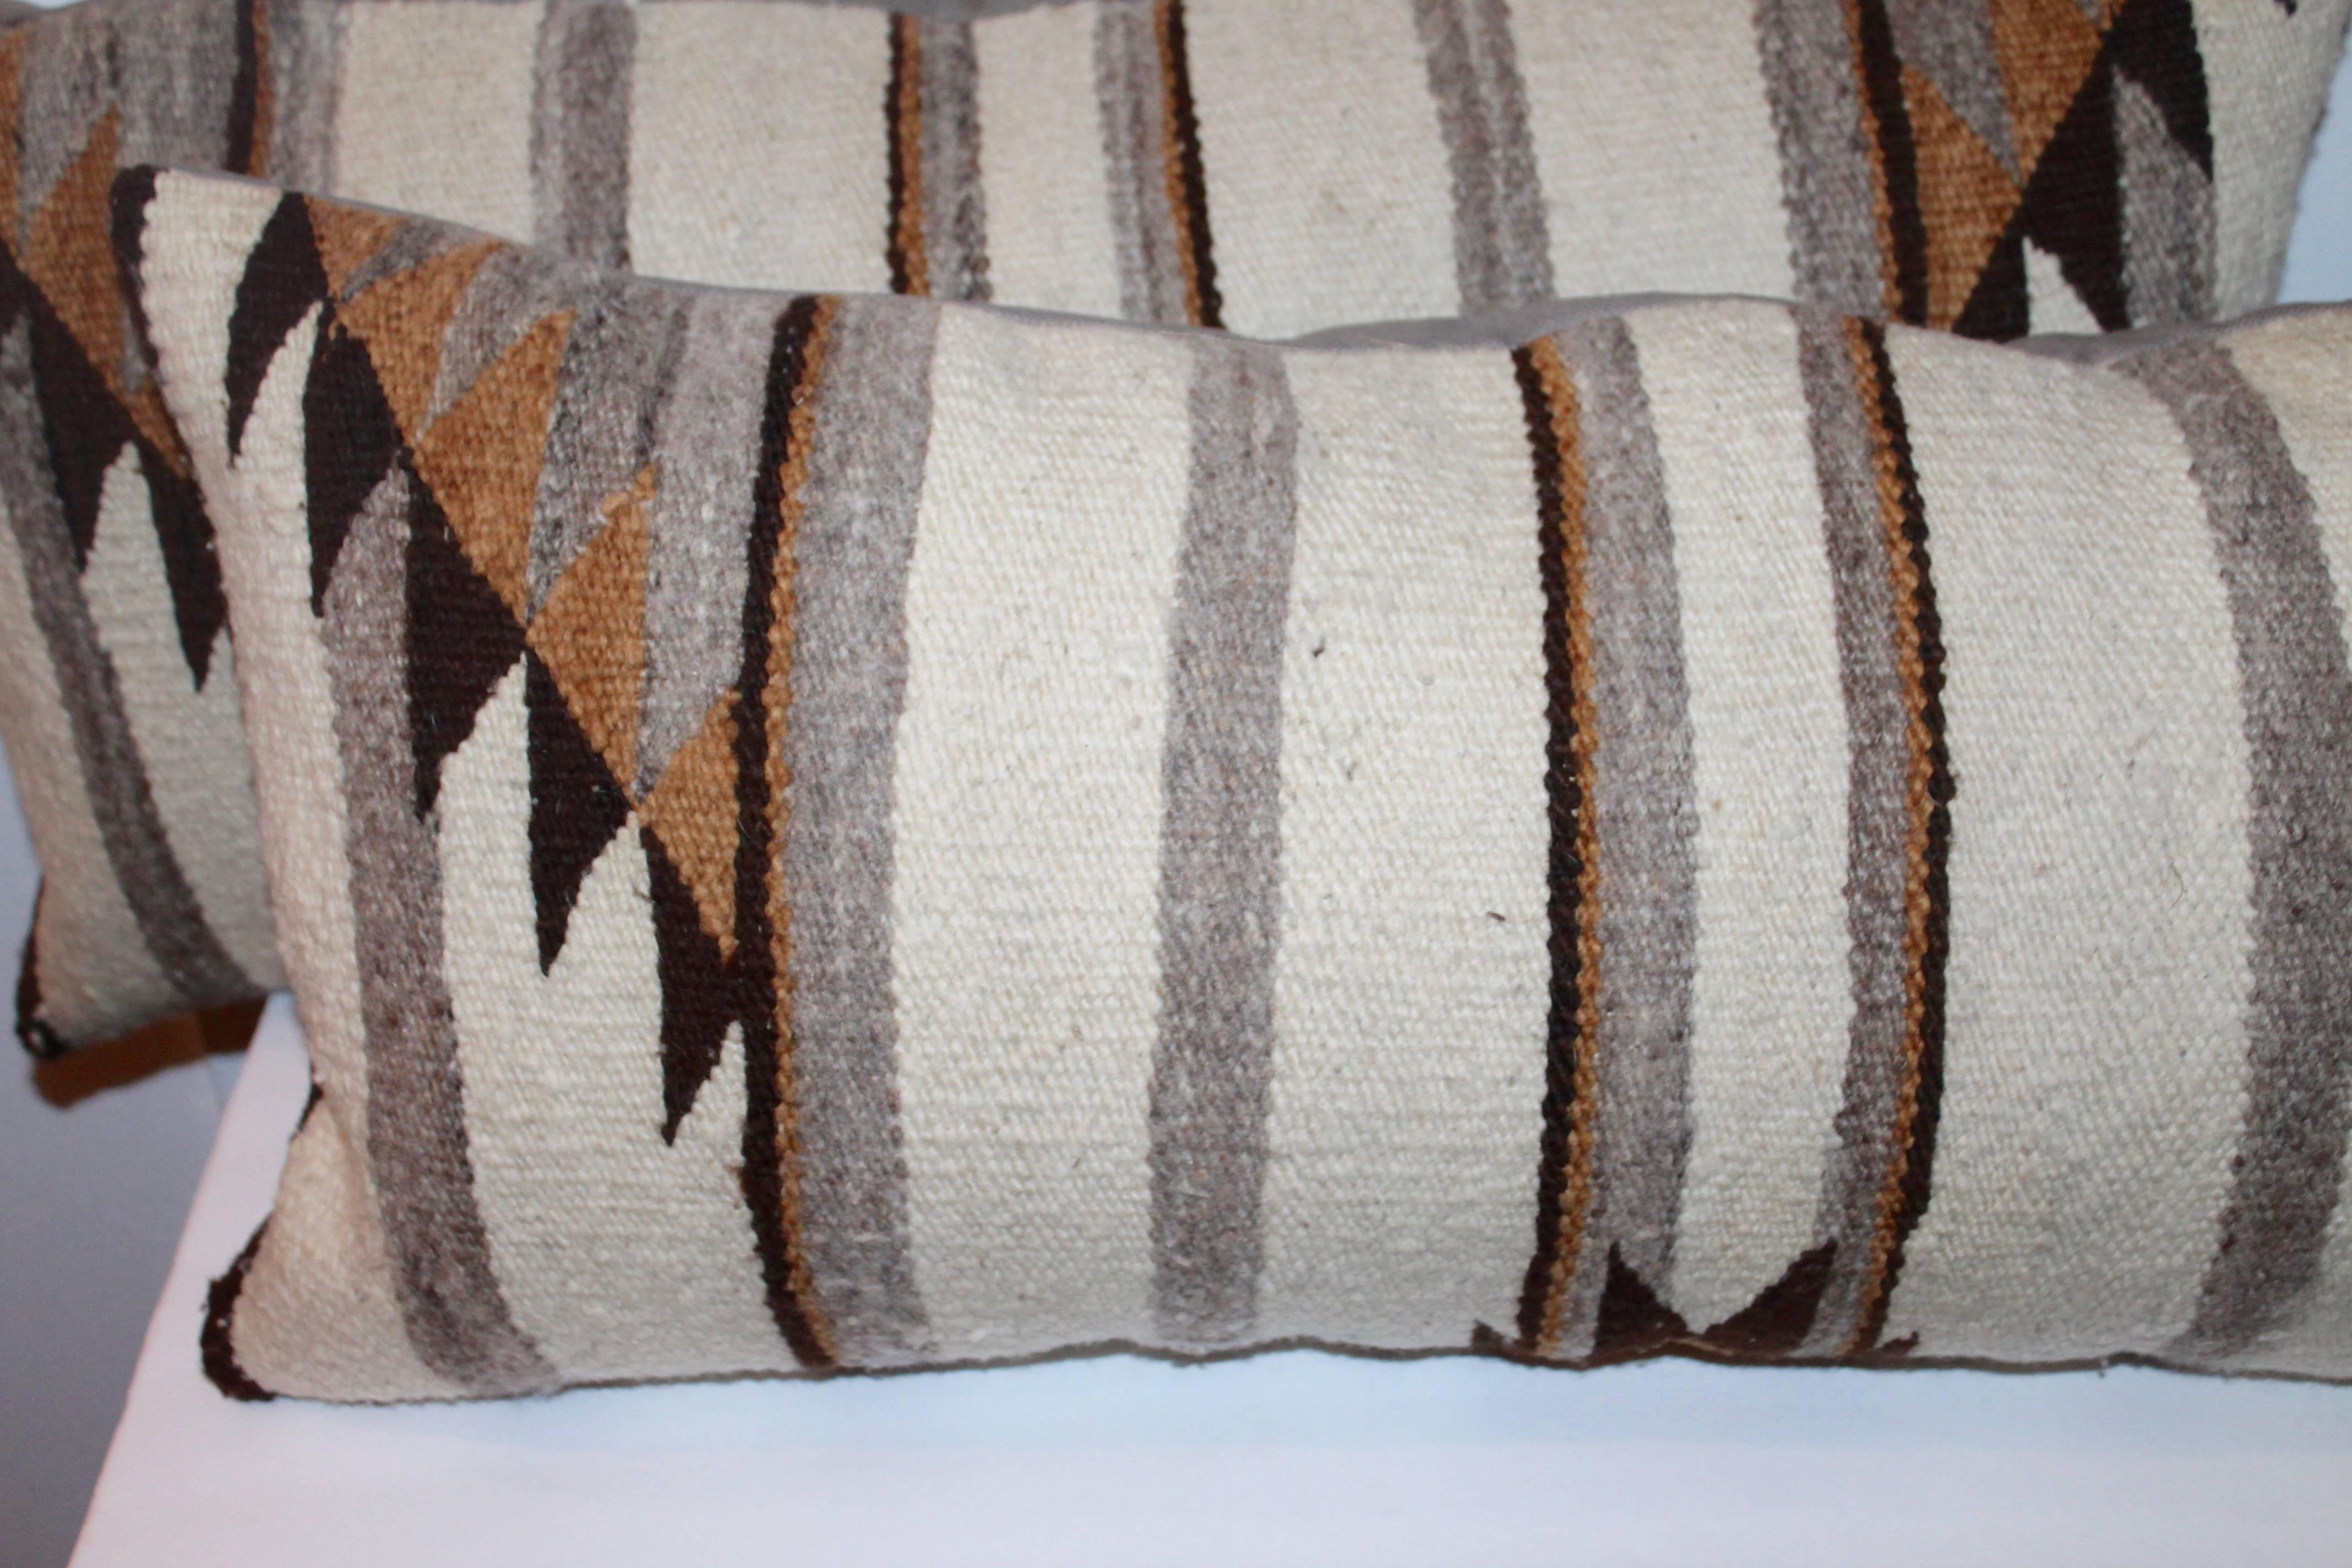 These geometric weaving bolsters are in fine condition and have taupe cotton backings. Sold as a pair.